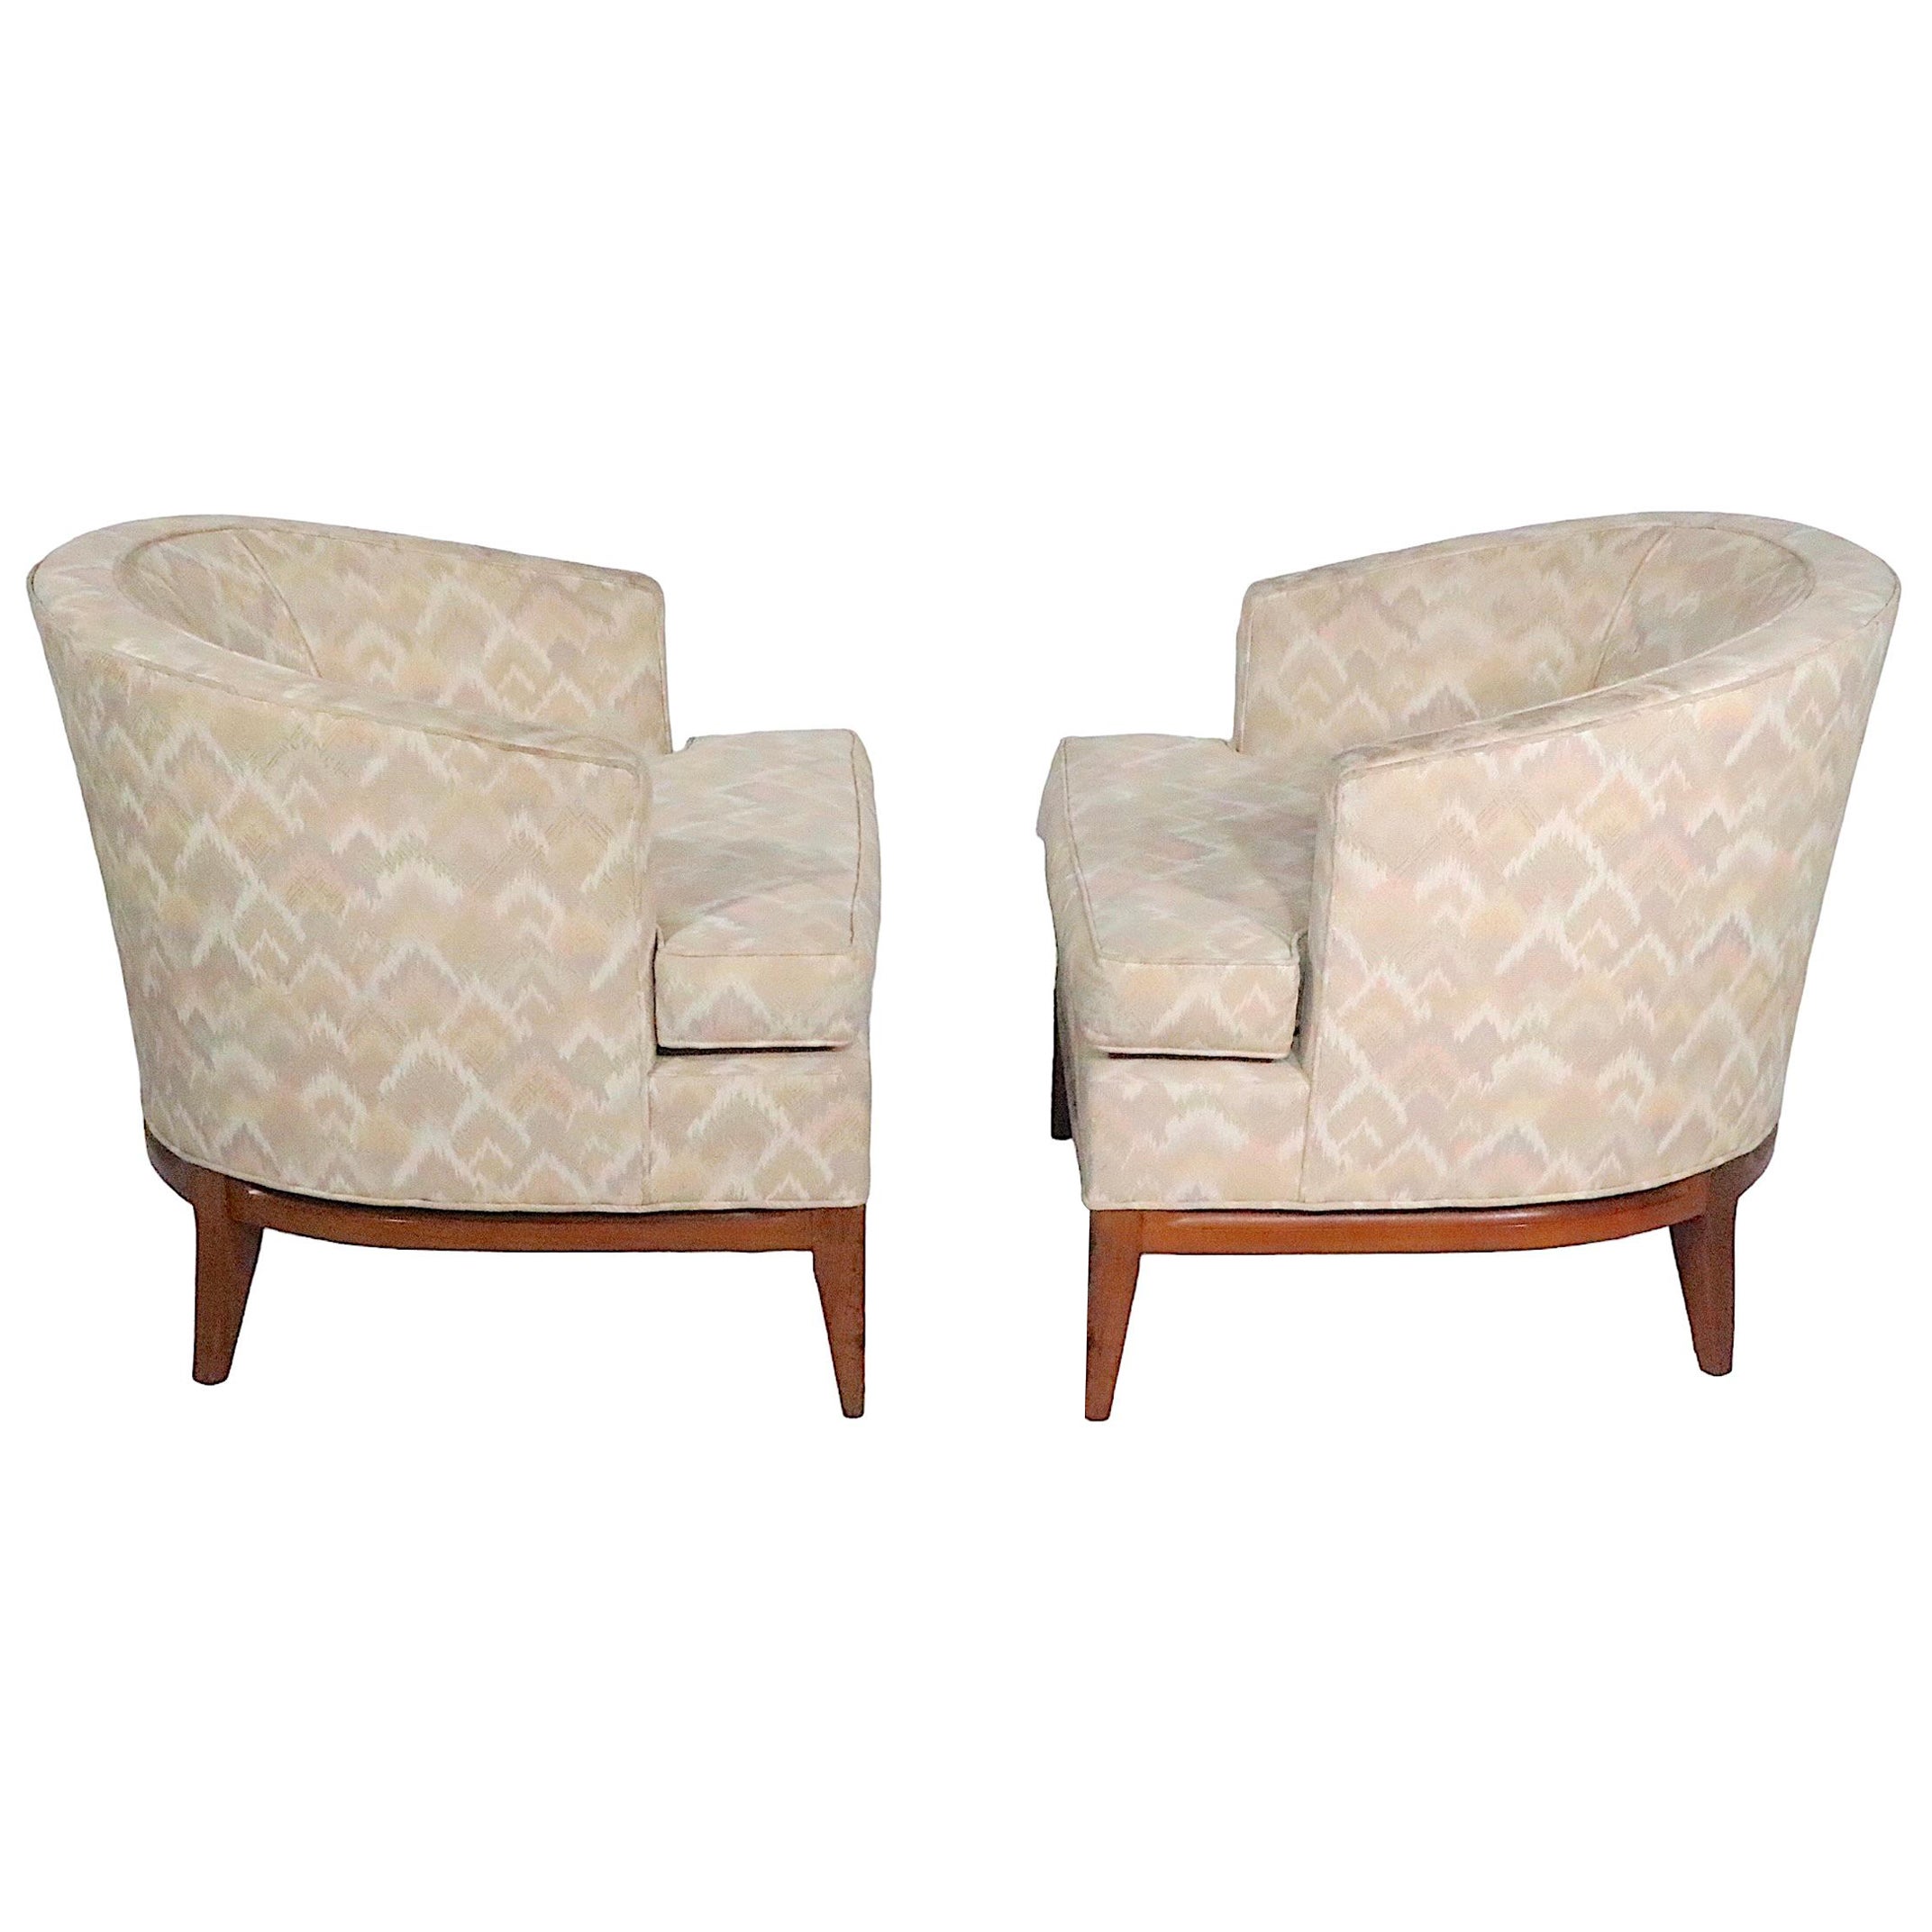 Pair. Mid Century Tub Chairs After Robsjohn Gibbings, circa 1950 - 1960s For Sale